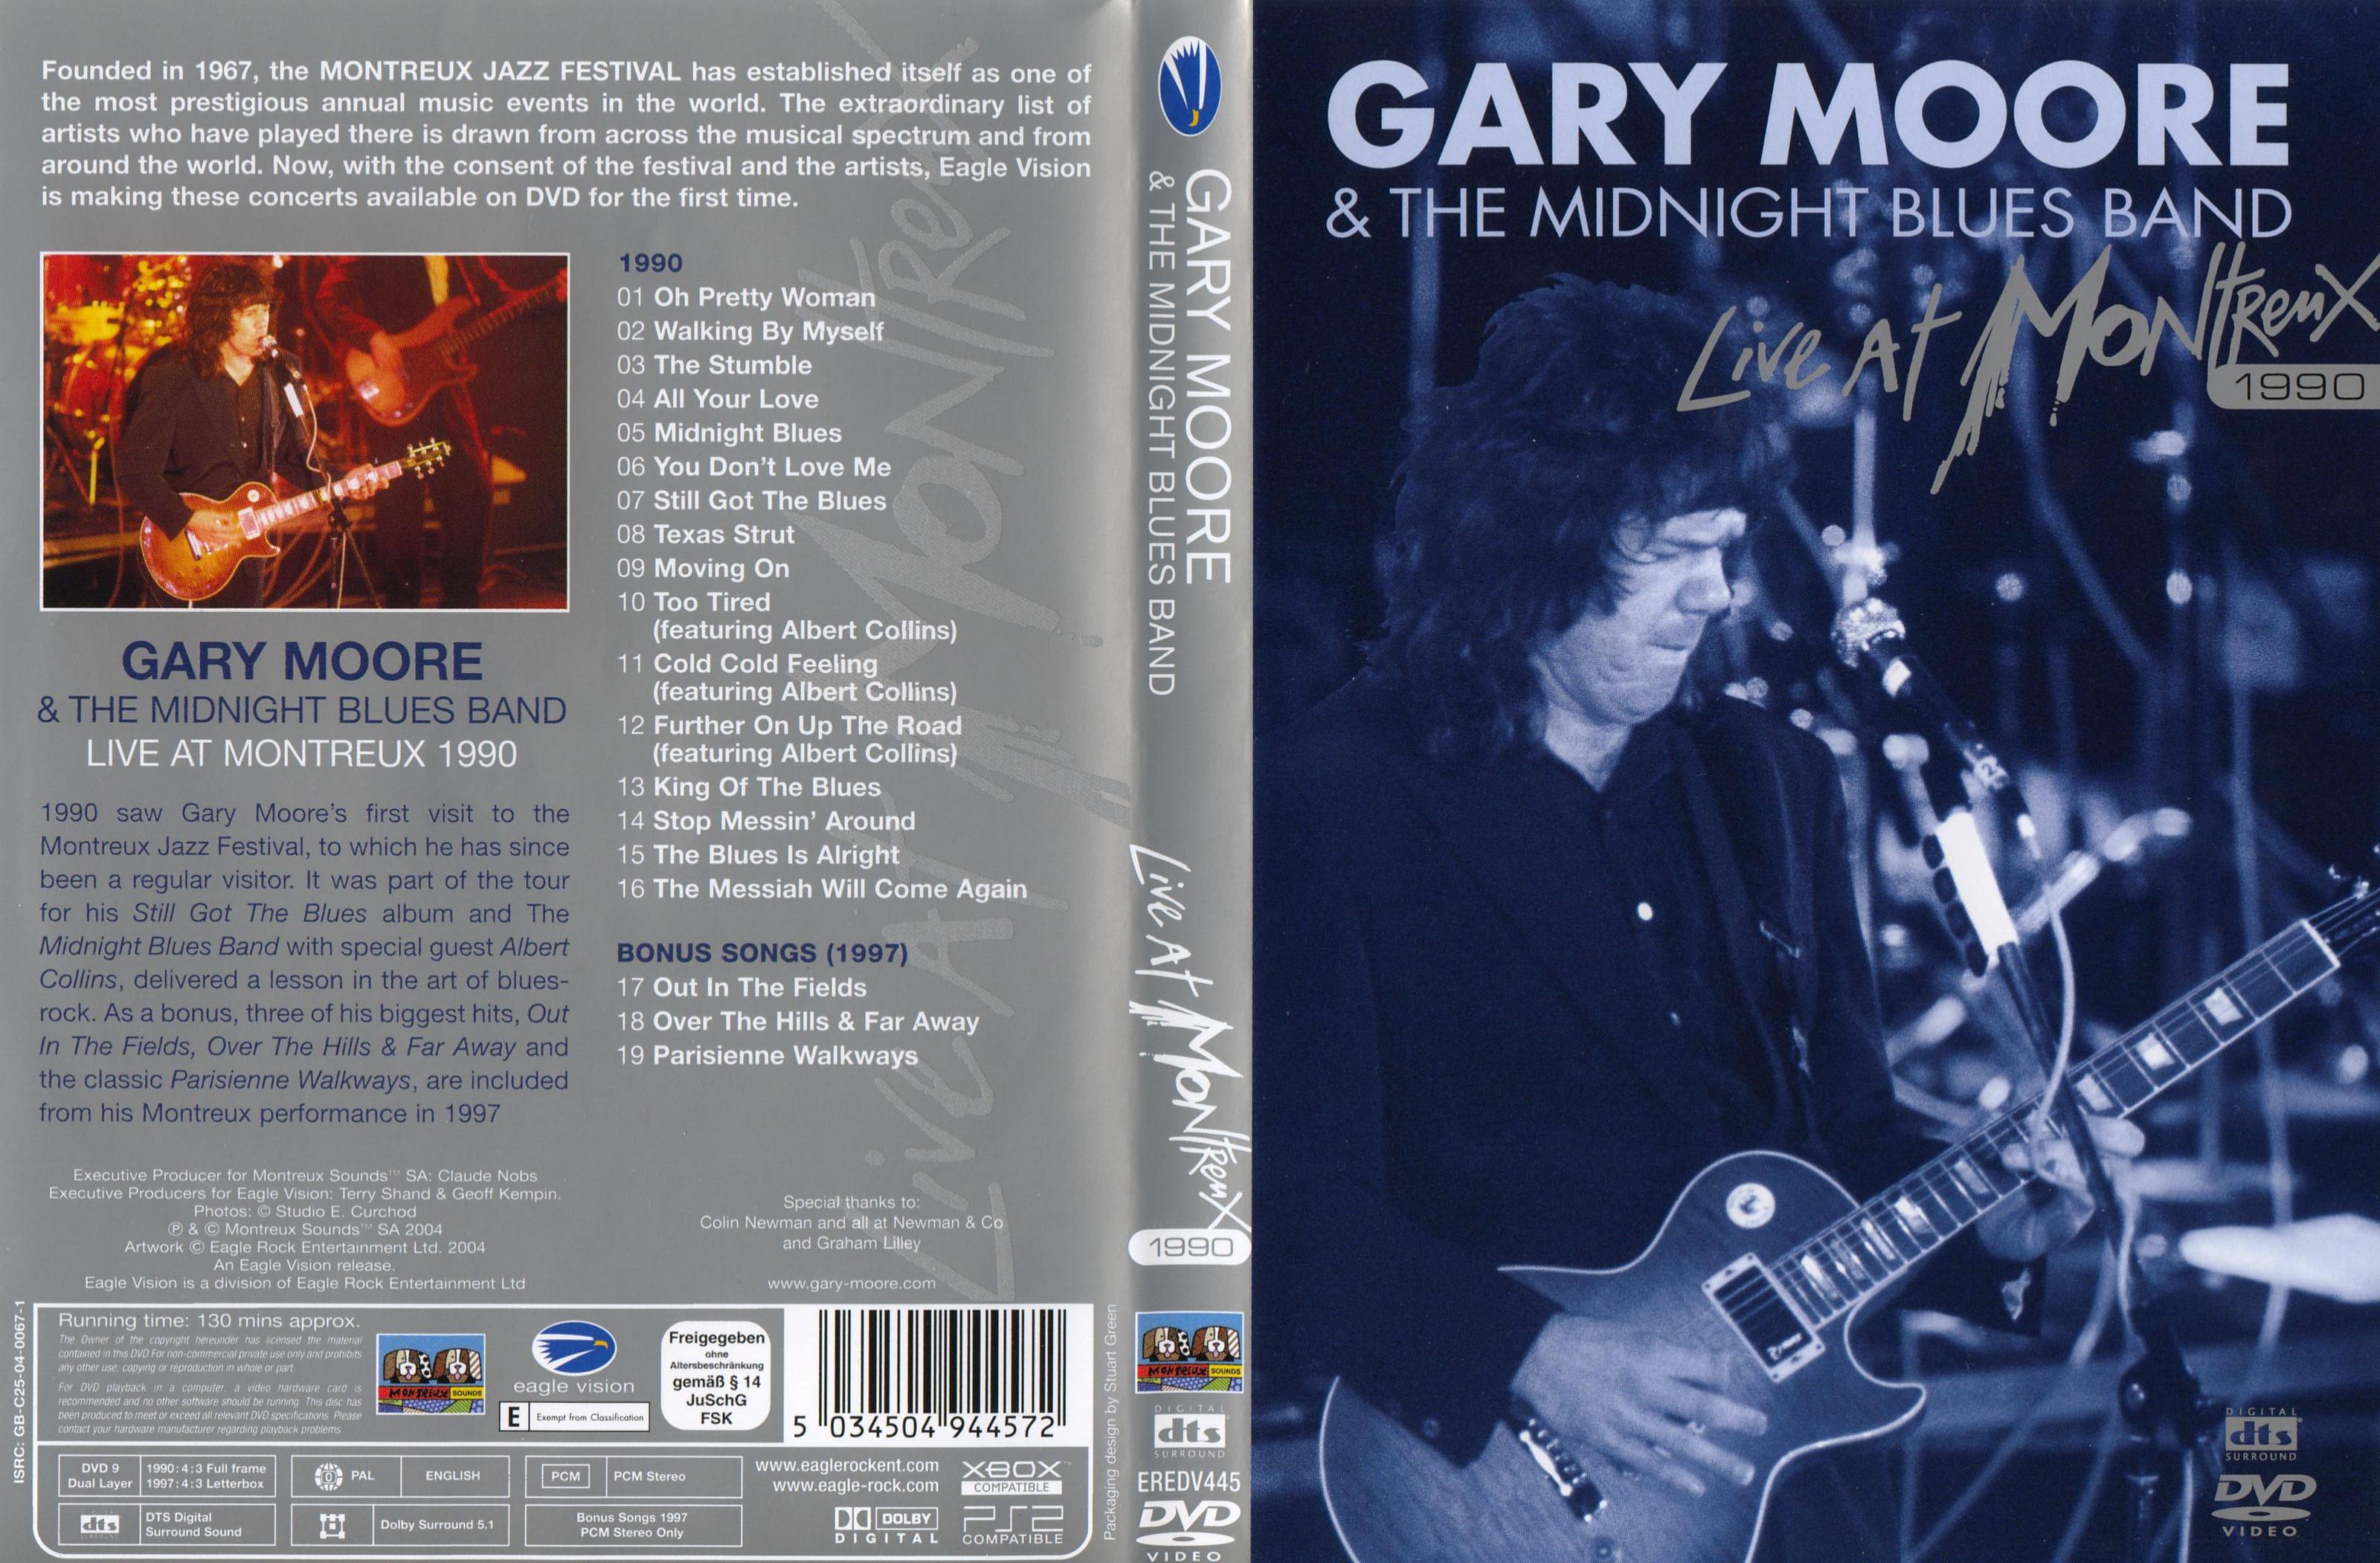 Jaquette DVD Gary Moore live at Montreux